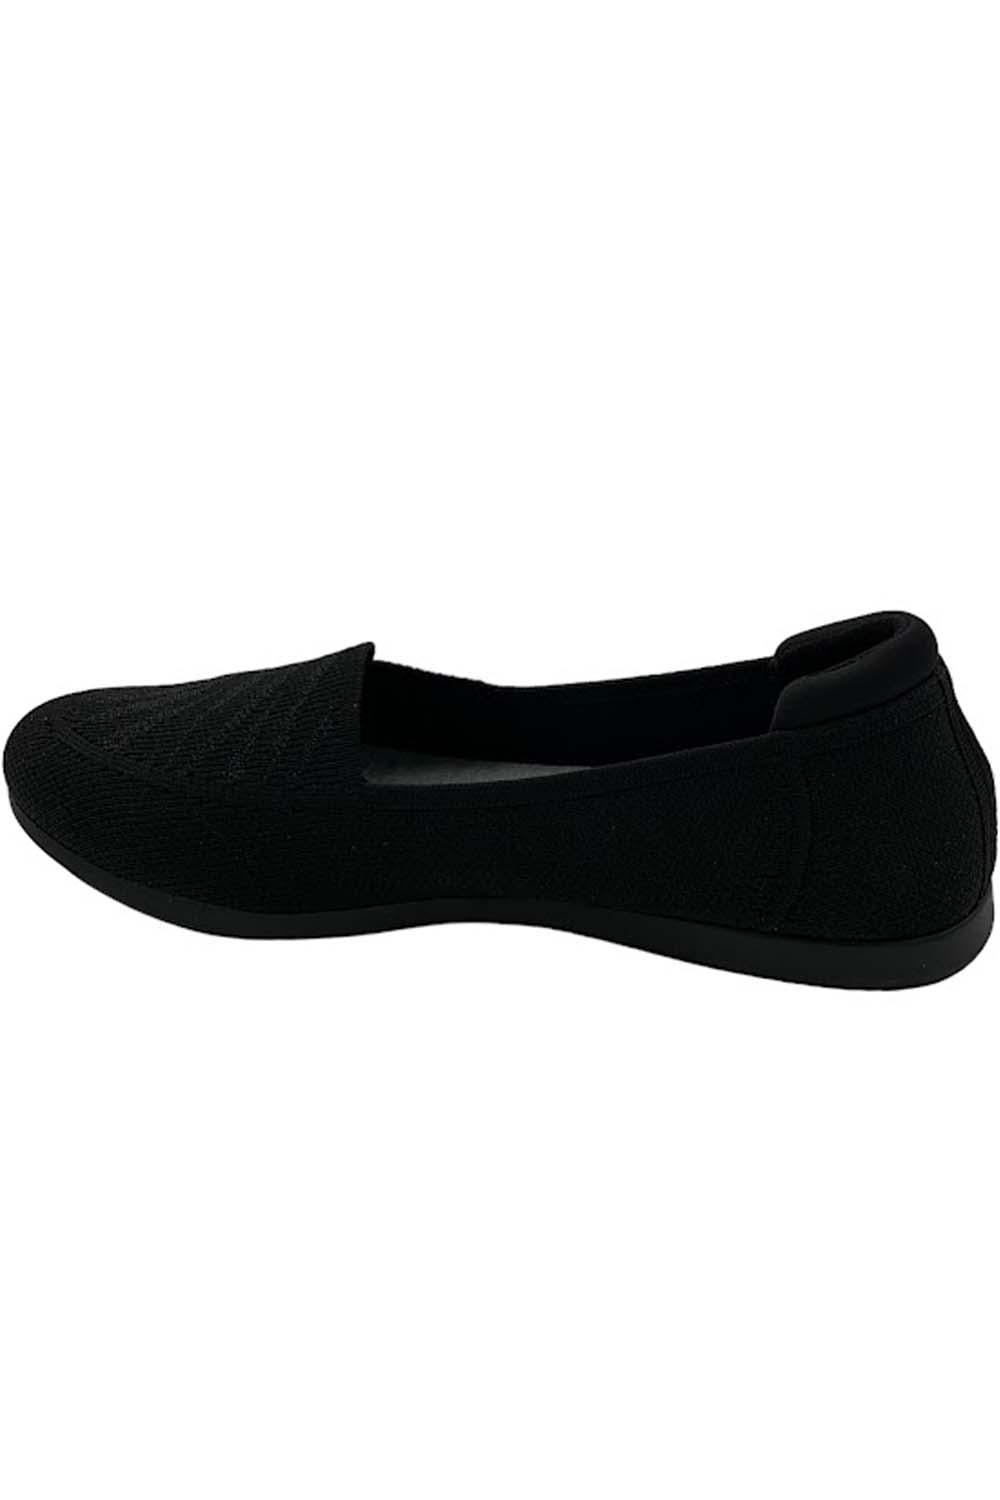 Clarks Cloudsteppers Washable Knit Loafers Carly Star Black | Jender